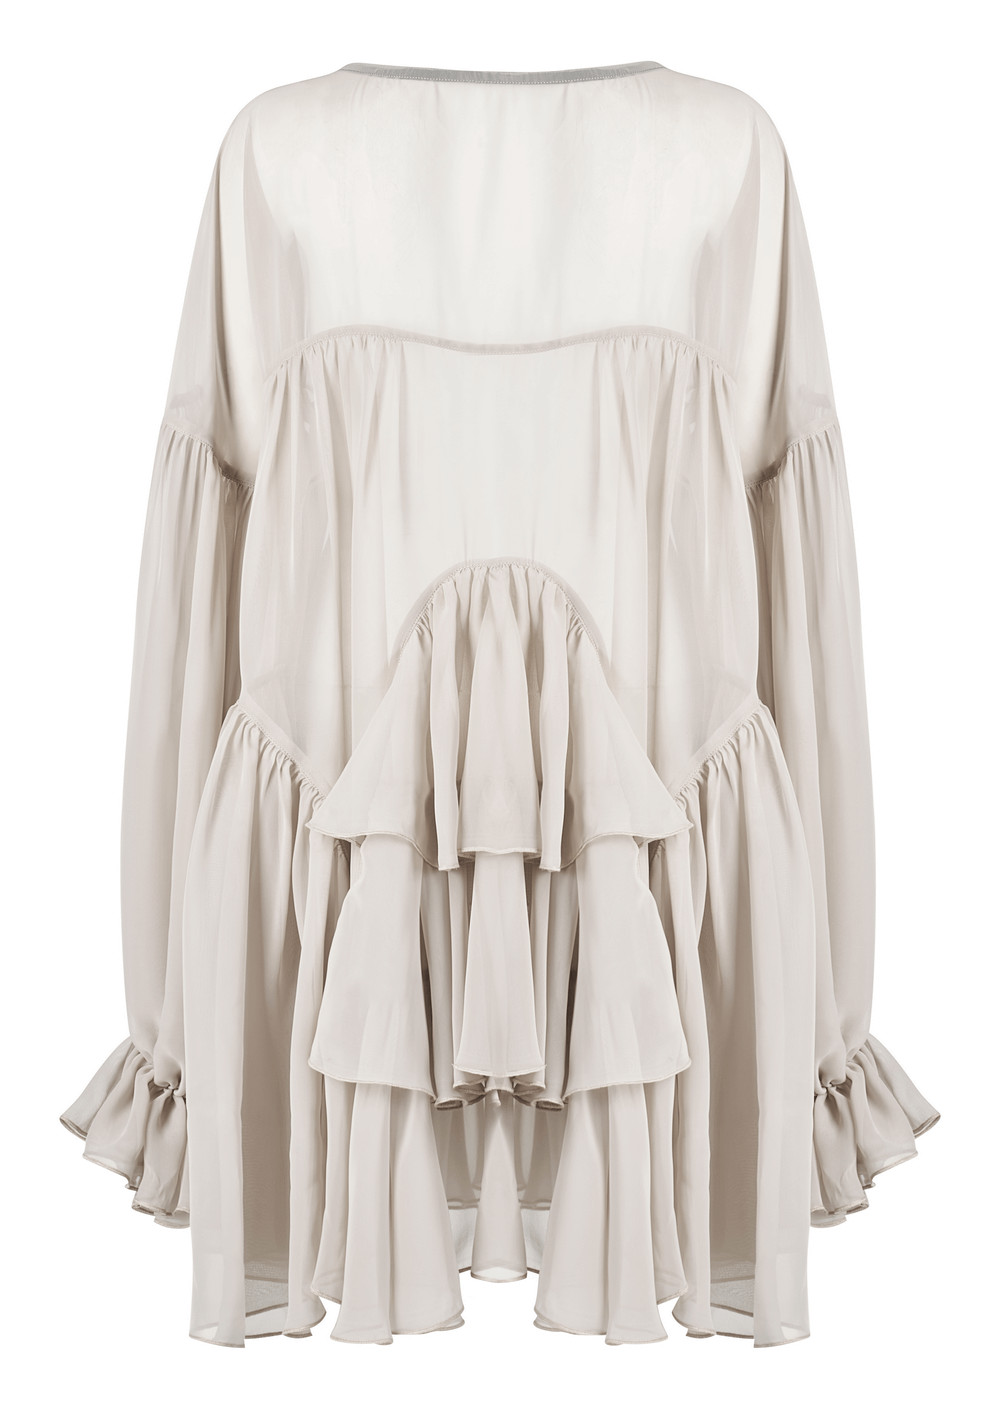 Chic Beige Chiffon Blouse with Ruffled Sleeves